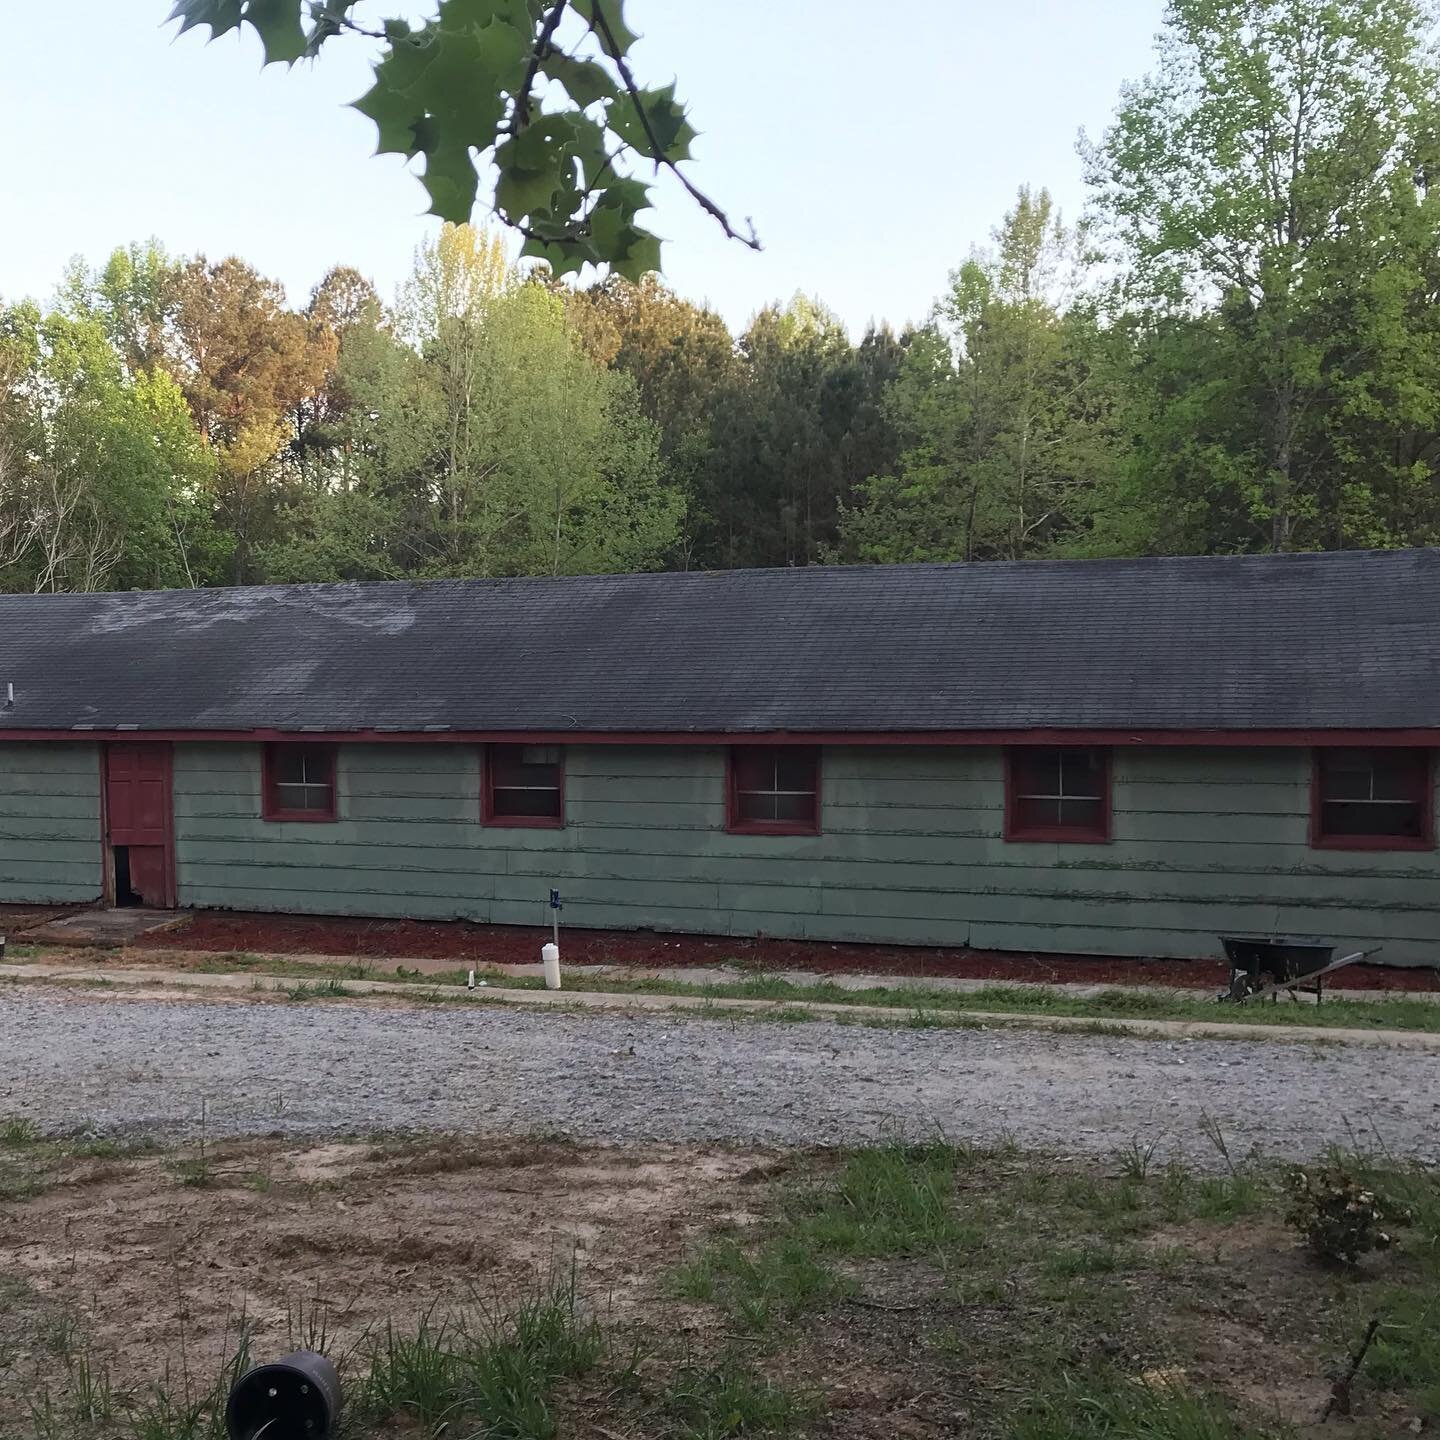 Before and after with painting at Freedom Hill Resort (RV/Tenting/Tiny Homes). #rvlife #rvliving #campinglife #tenting #tinyhome #tinyhomeonwheels #tinyhomelifestyle #hipcamp #airbnb #vacations #staycation #nc #lakegaston #campgrounds